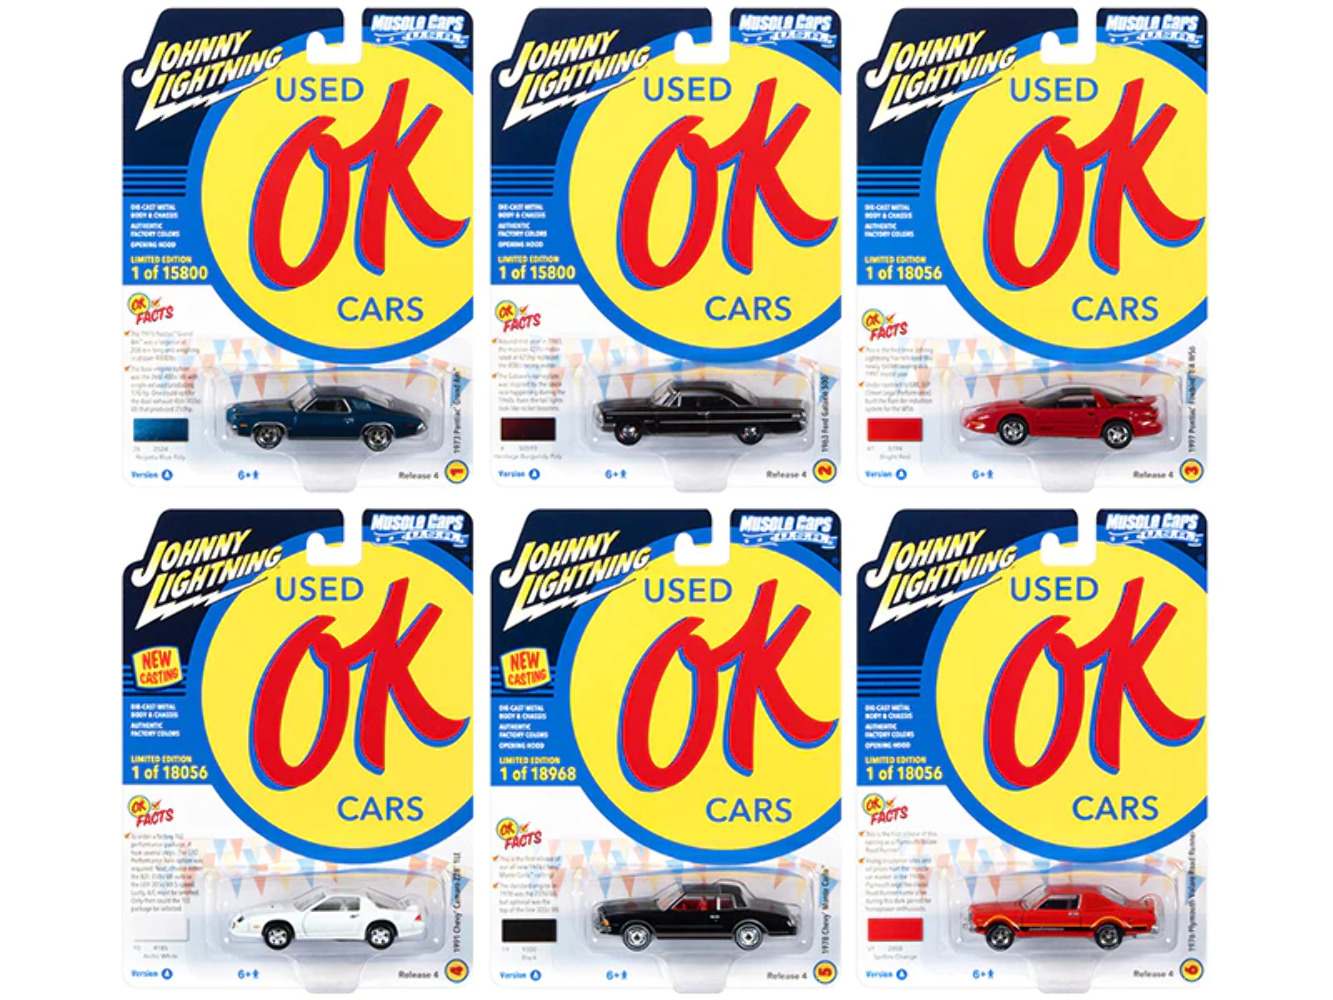 Muscle Cars USA 2021 Release OK Used Cars Set of pieces 1/64 Diecast Model Cars